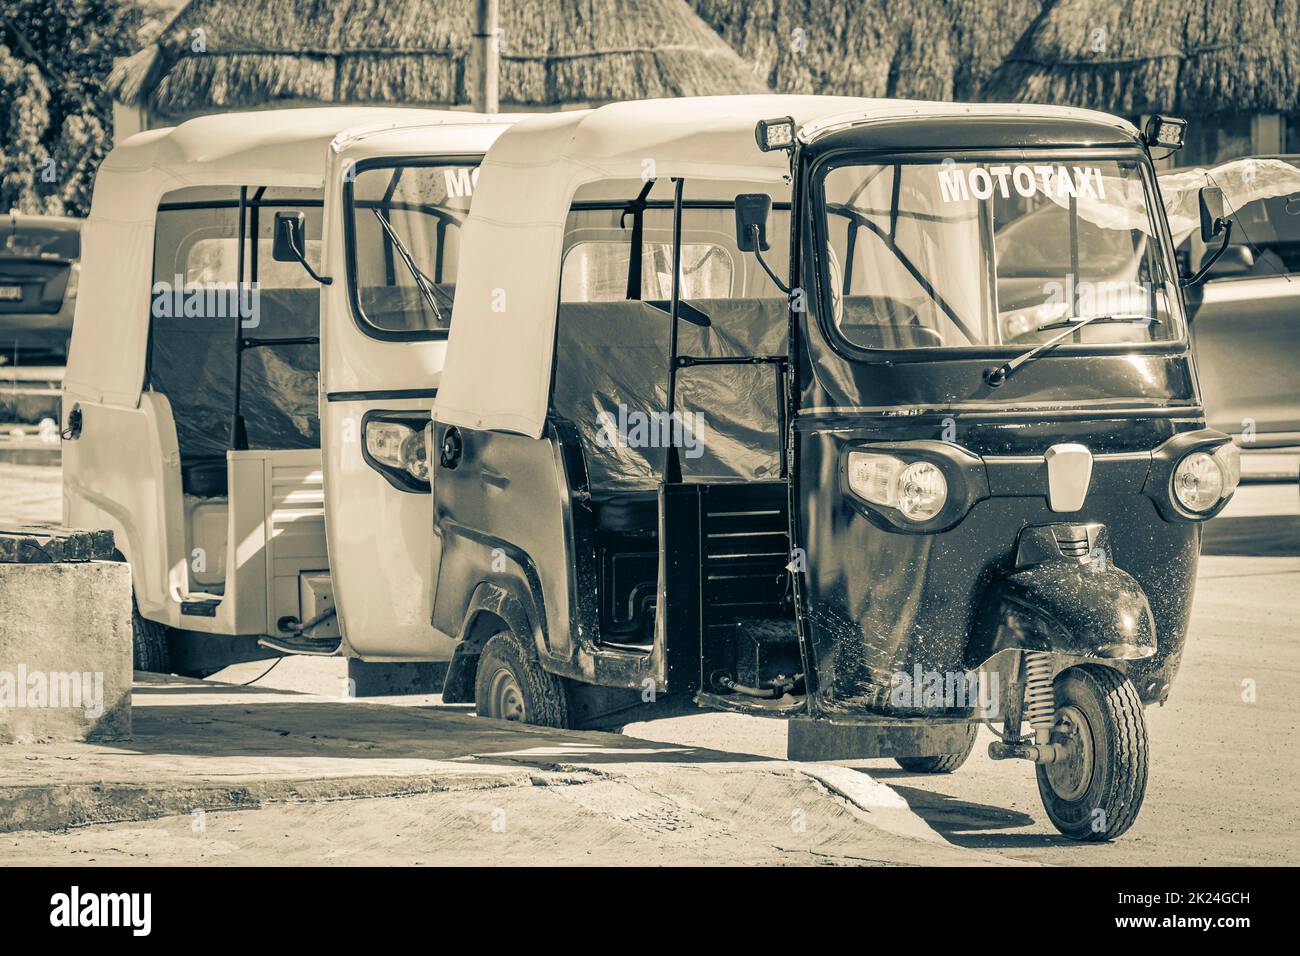 Black and white picture of auto rickshaw tuk tuk in beautiful Chiquilá village port harbor Puerto de Chiquilá in Quintana Roo Mexico. Stock Photo